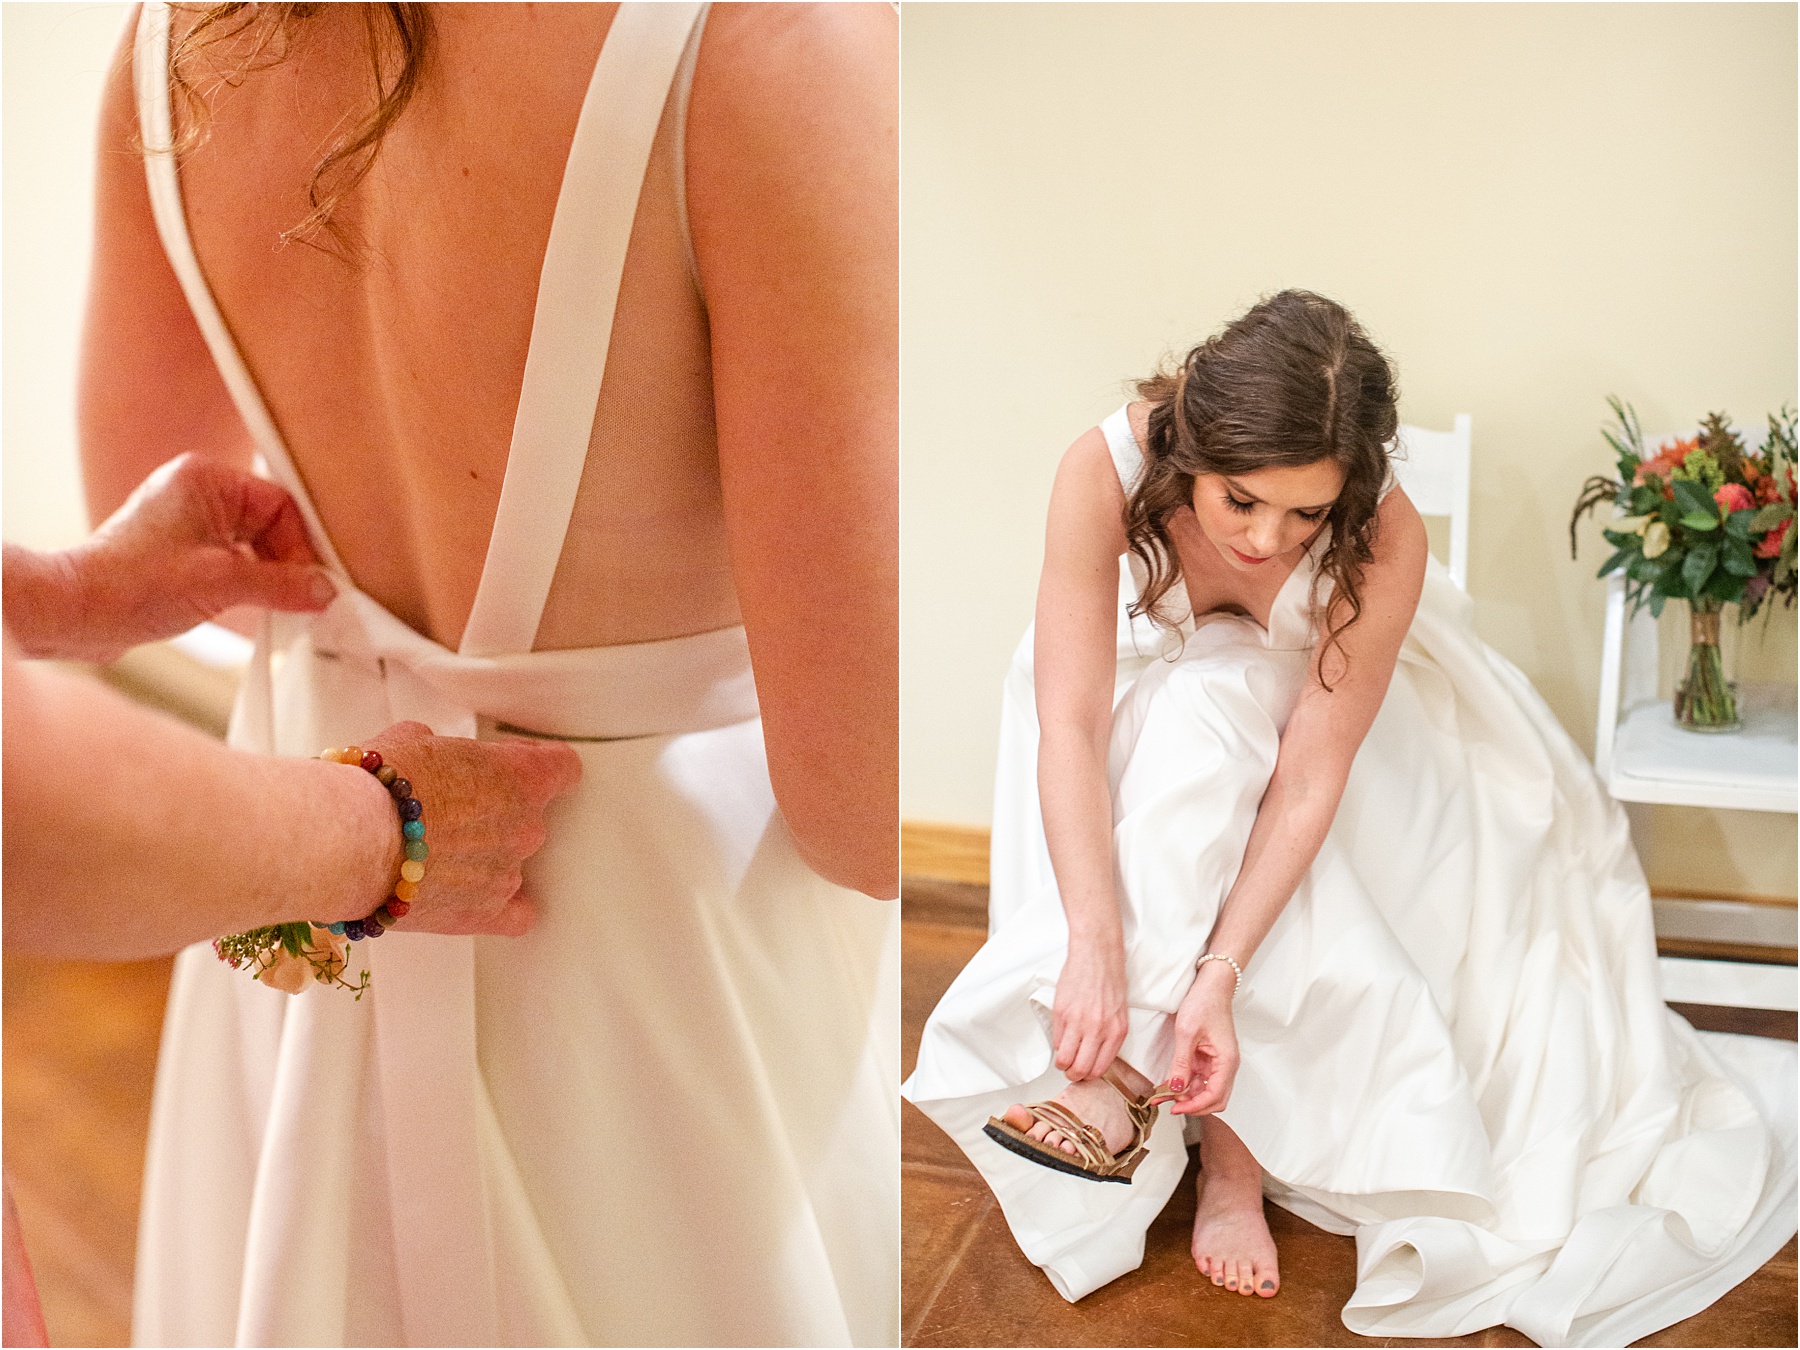 Woman puts on shoes under her wedding dress